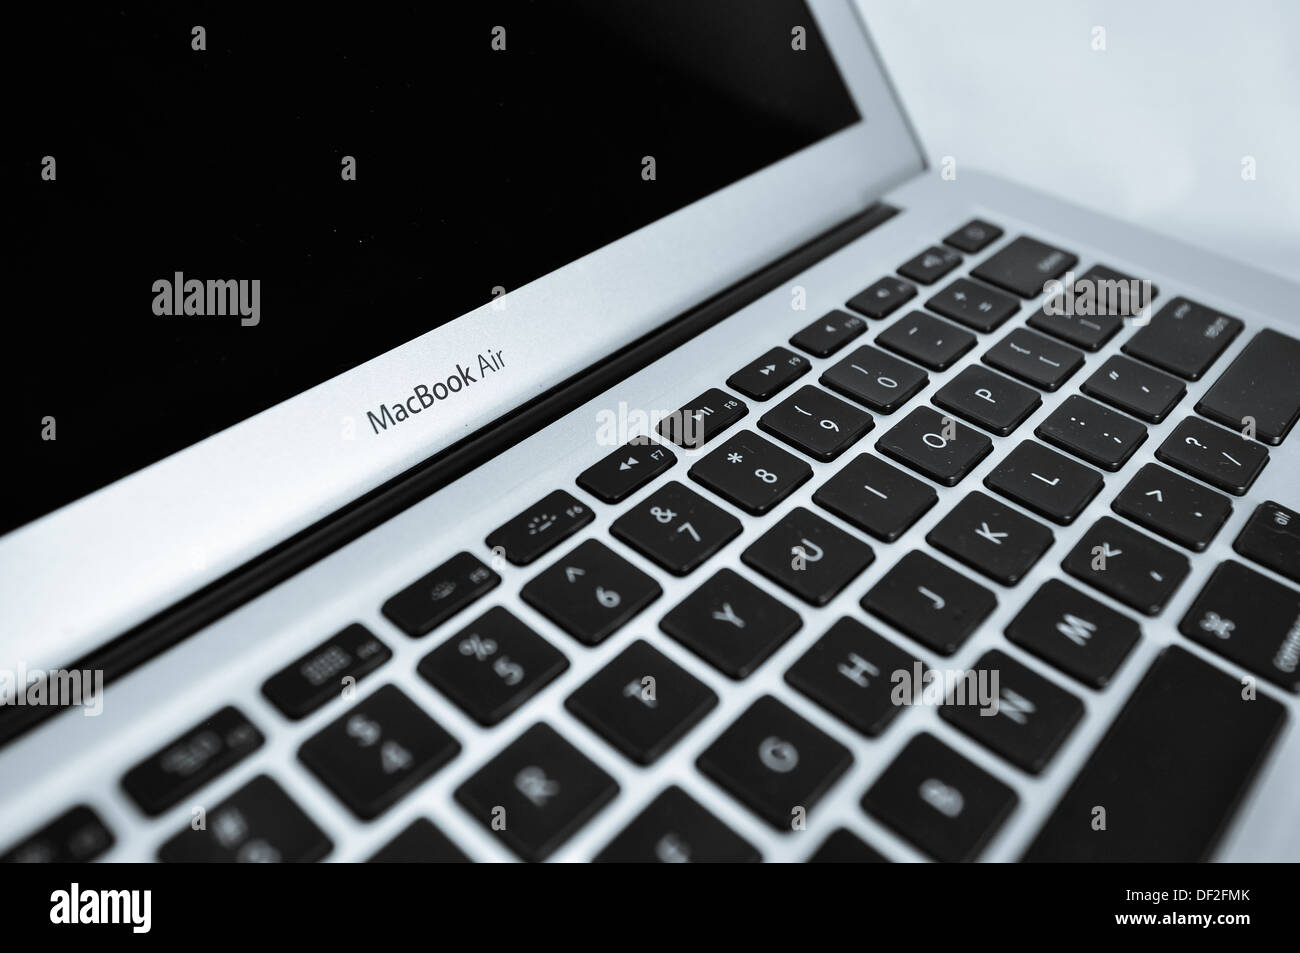 Macbook Air in different silhouette, keyboard and side. Stock Photo